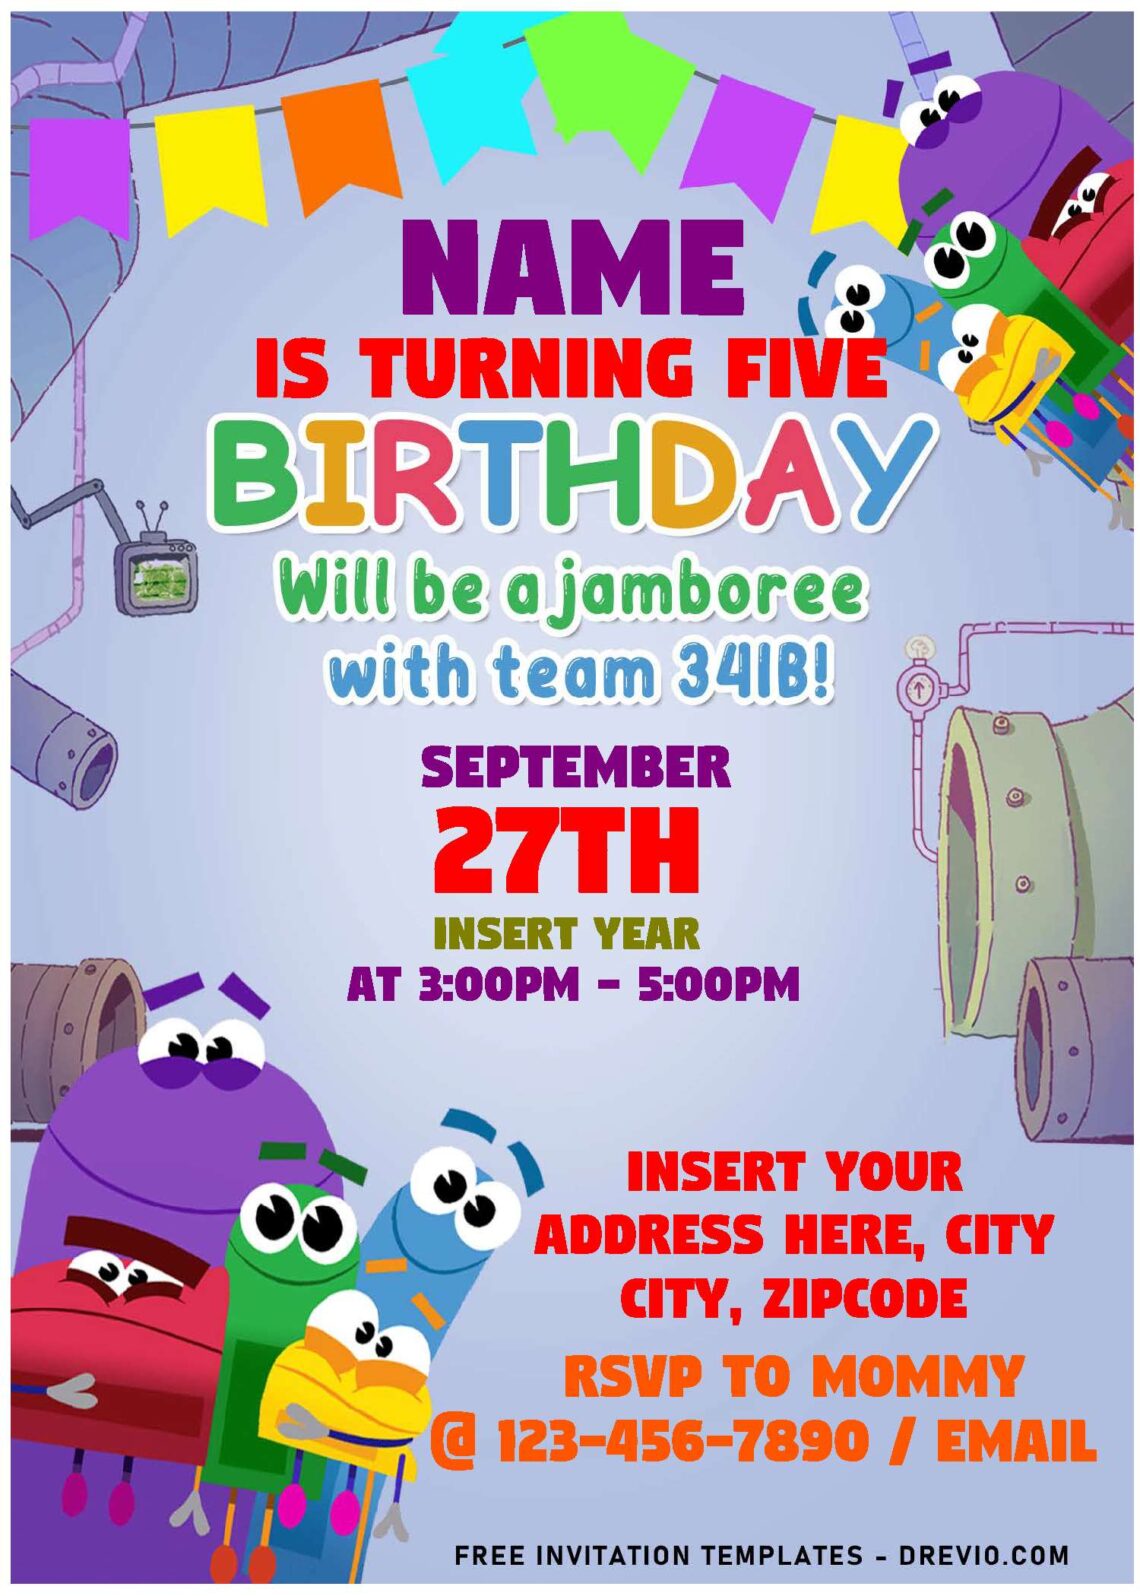 (Free Editable PDF) Friendly And Funny StoryBots Birthday Invitation Templates with adorable Red and purple bots